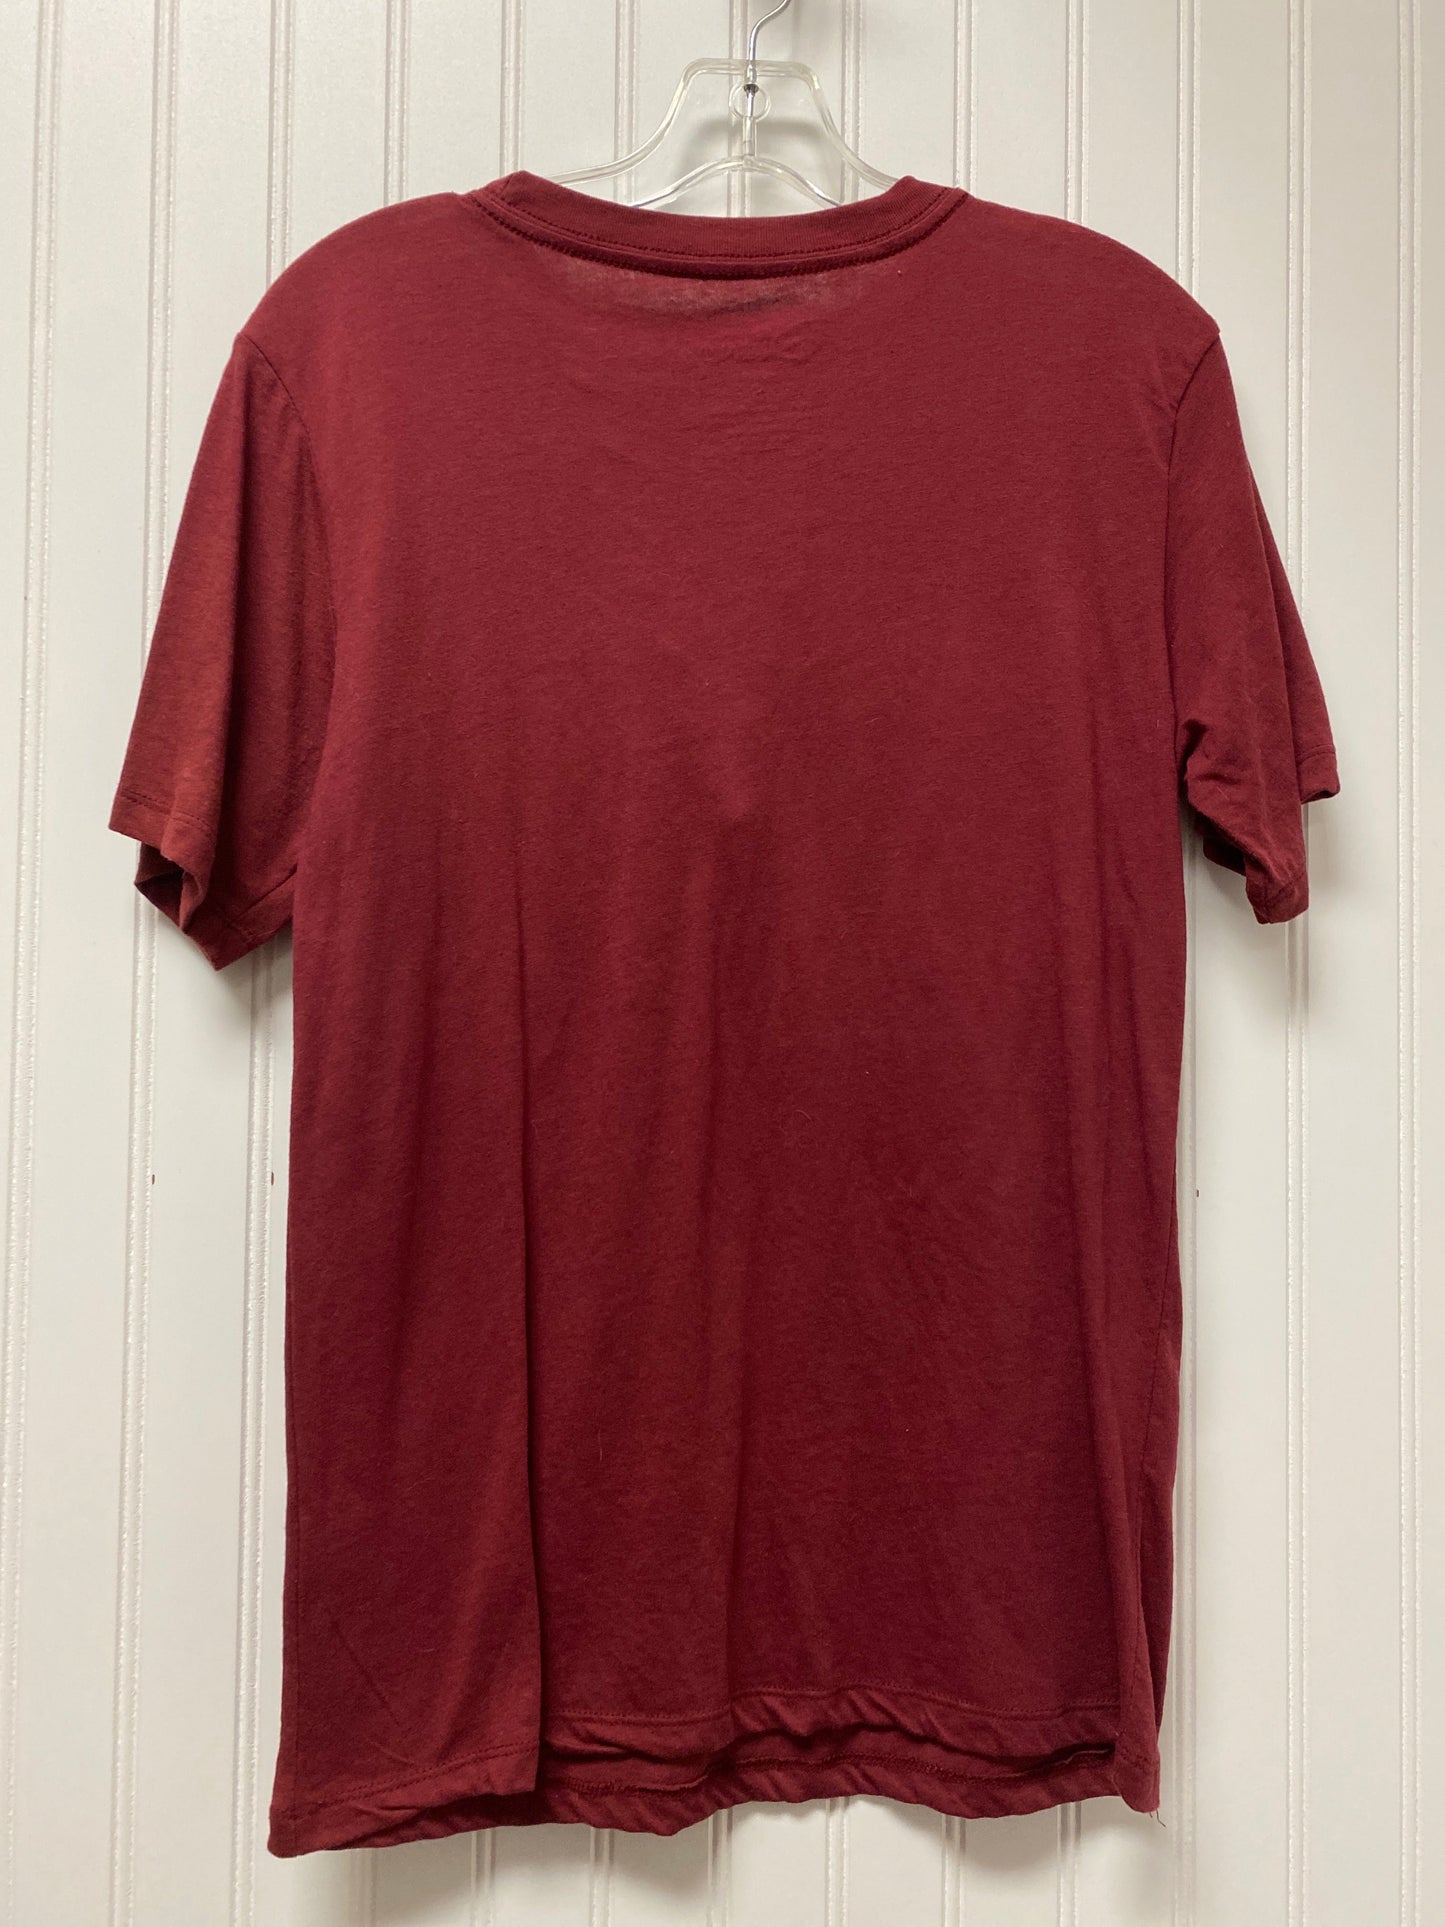 Red Top Short Sleeve Basic Disney Store, Size S